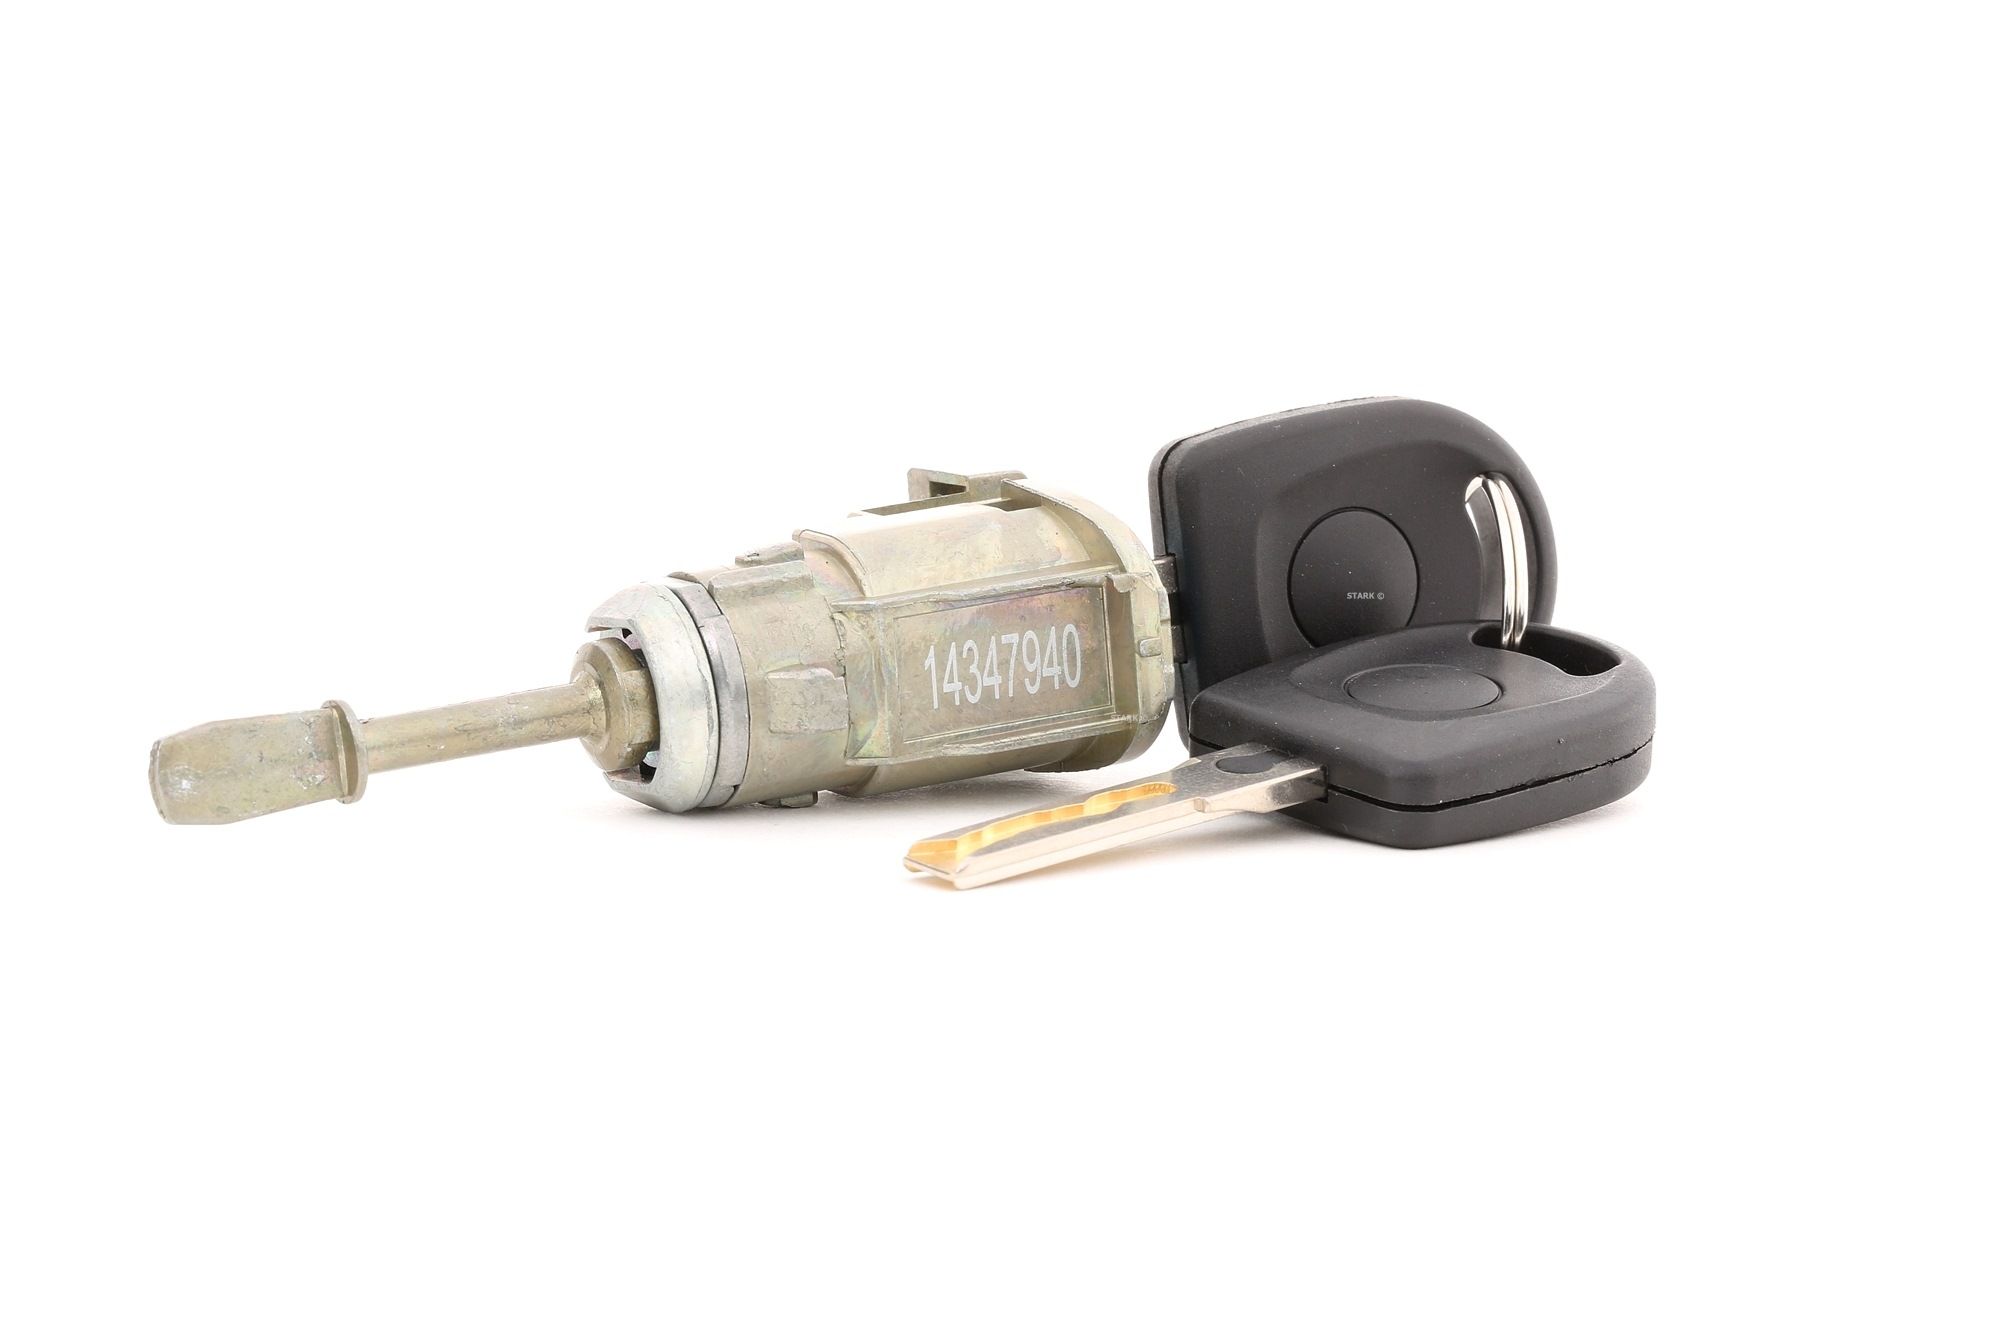 STARK SKLCY-4750001 Lock Cylinder VW experience and price